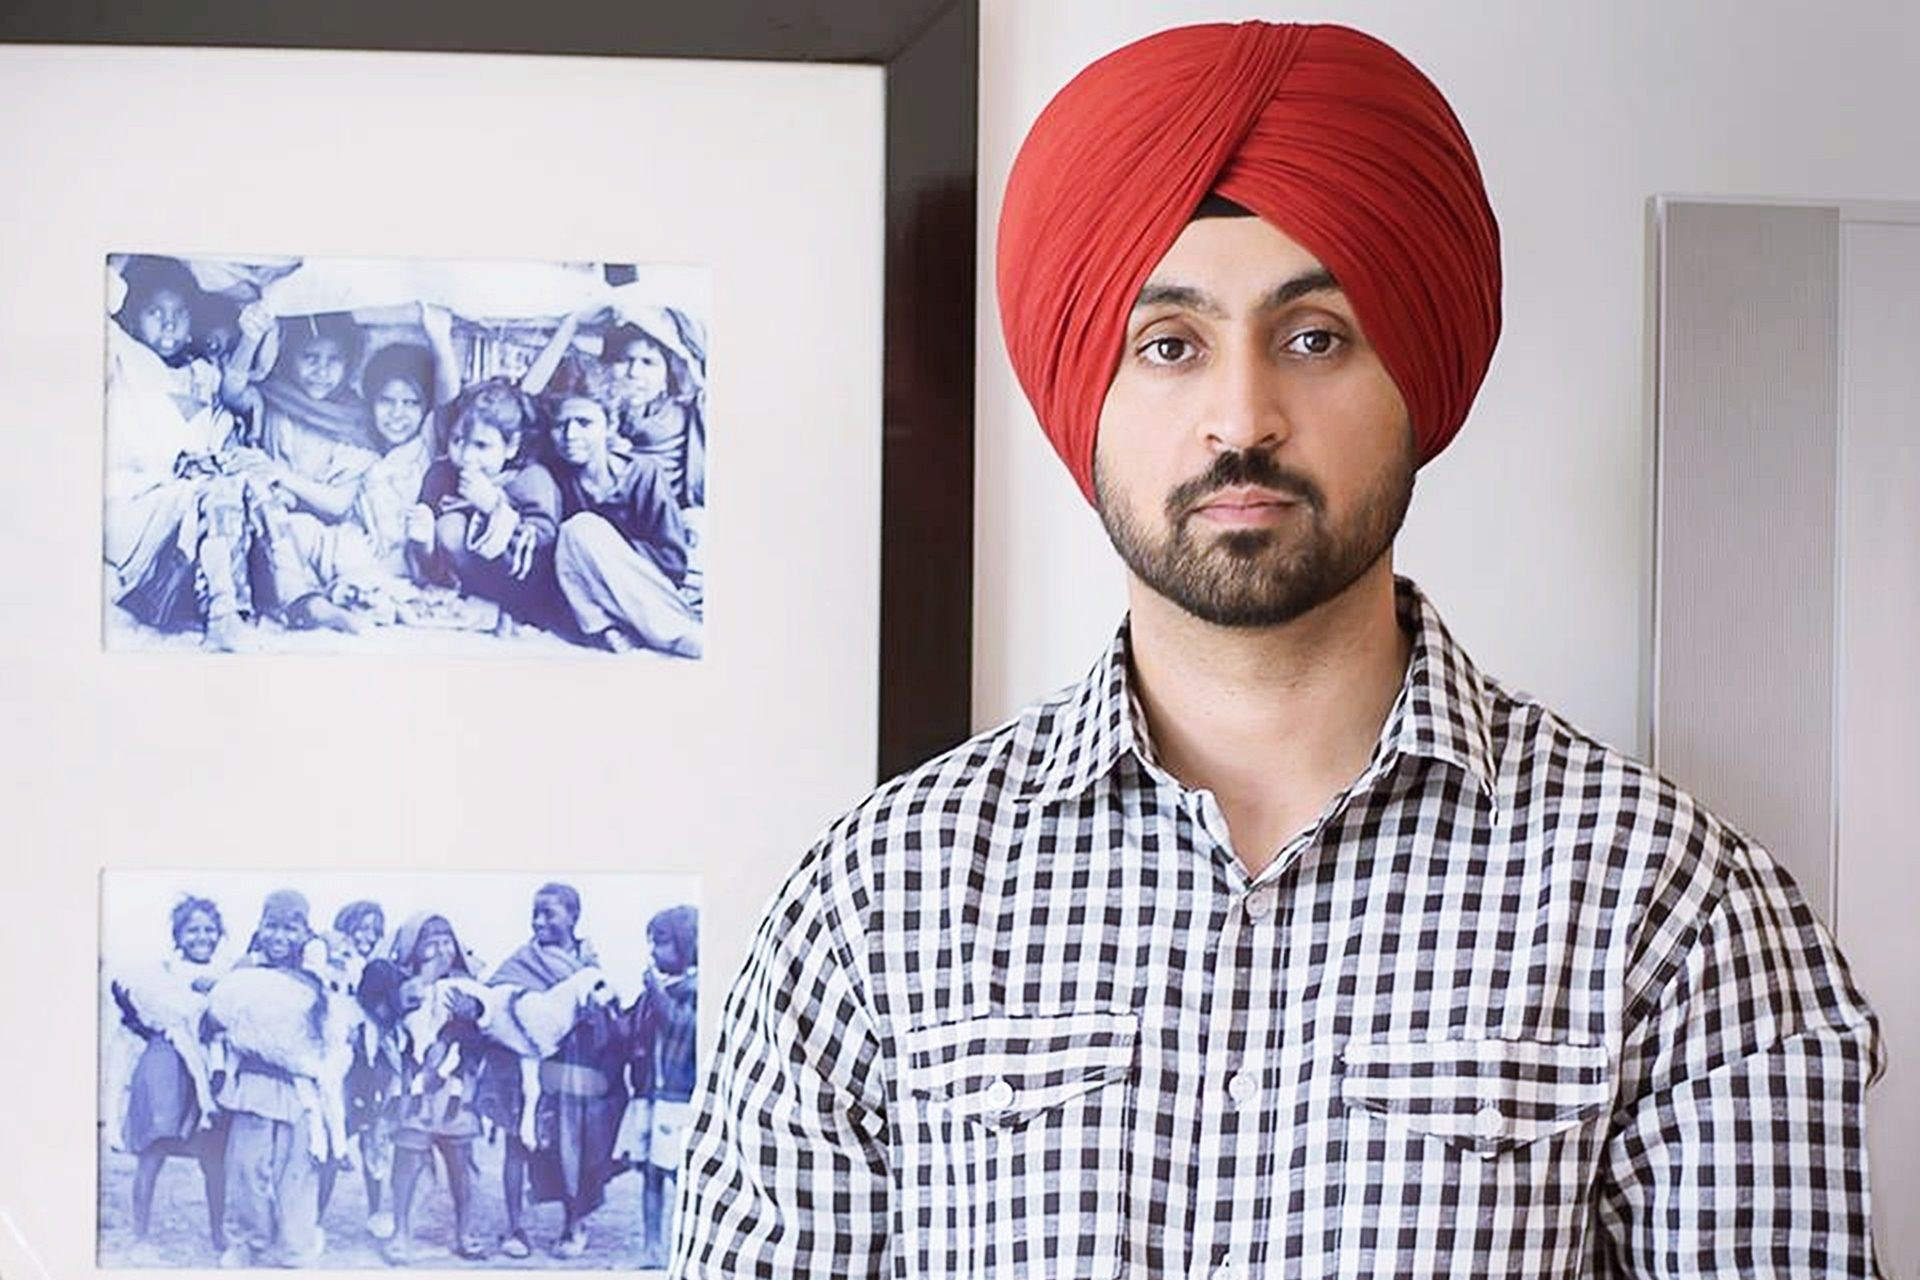 Photo Of Diljit Dosanjh In Red Turban